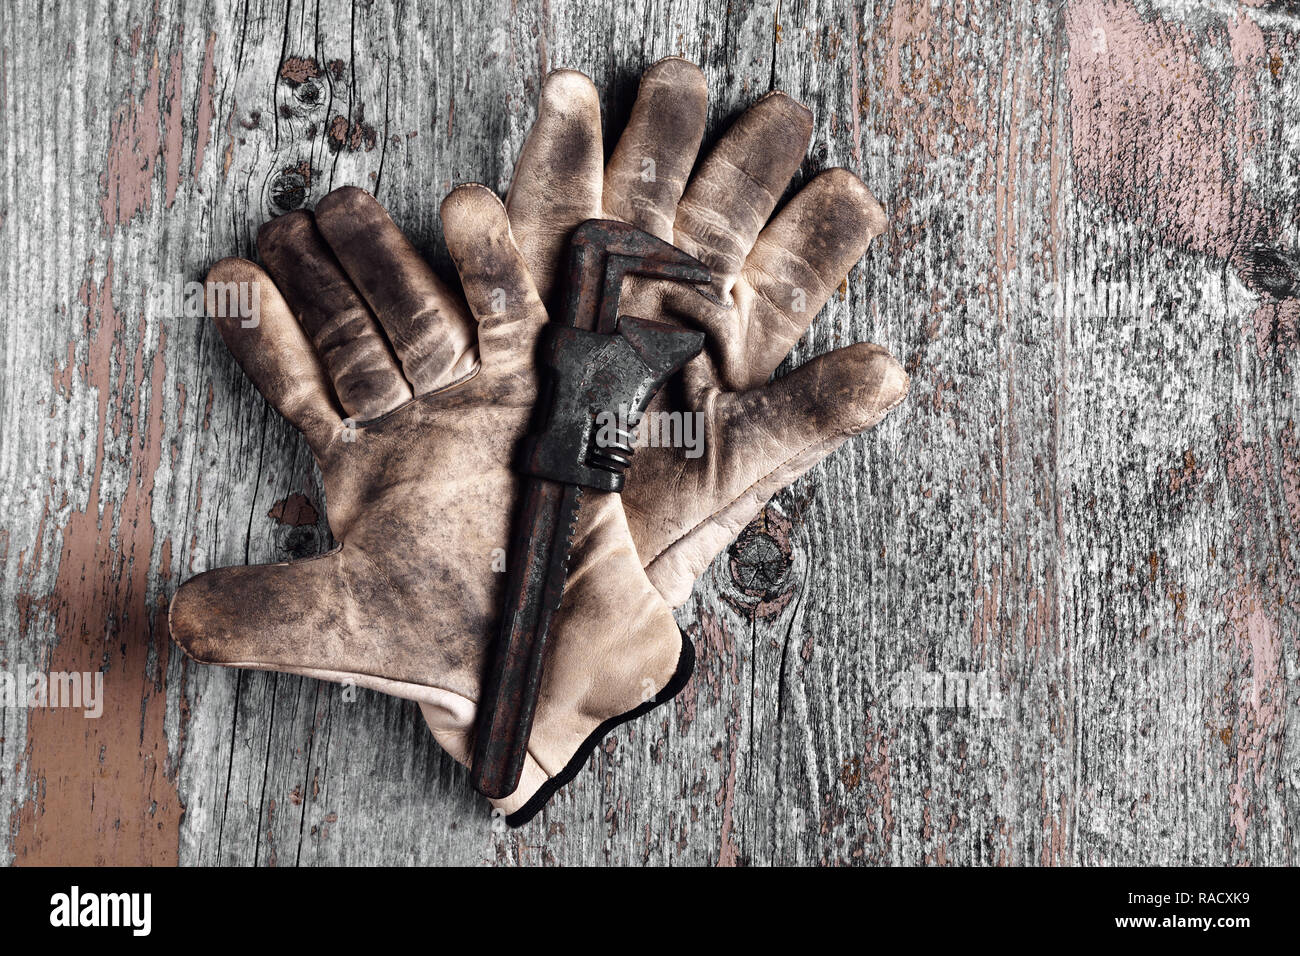 Old wrench on work glove Stock Photo